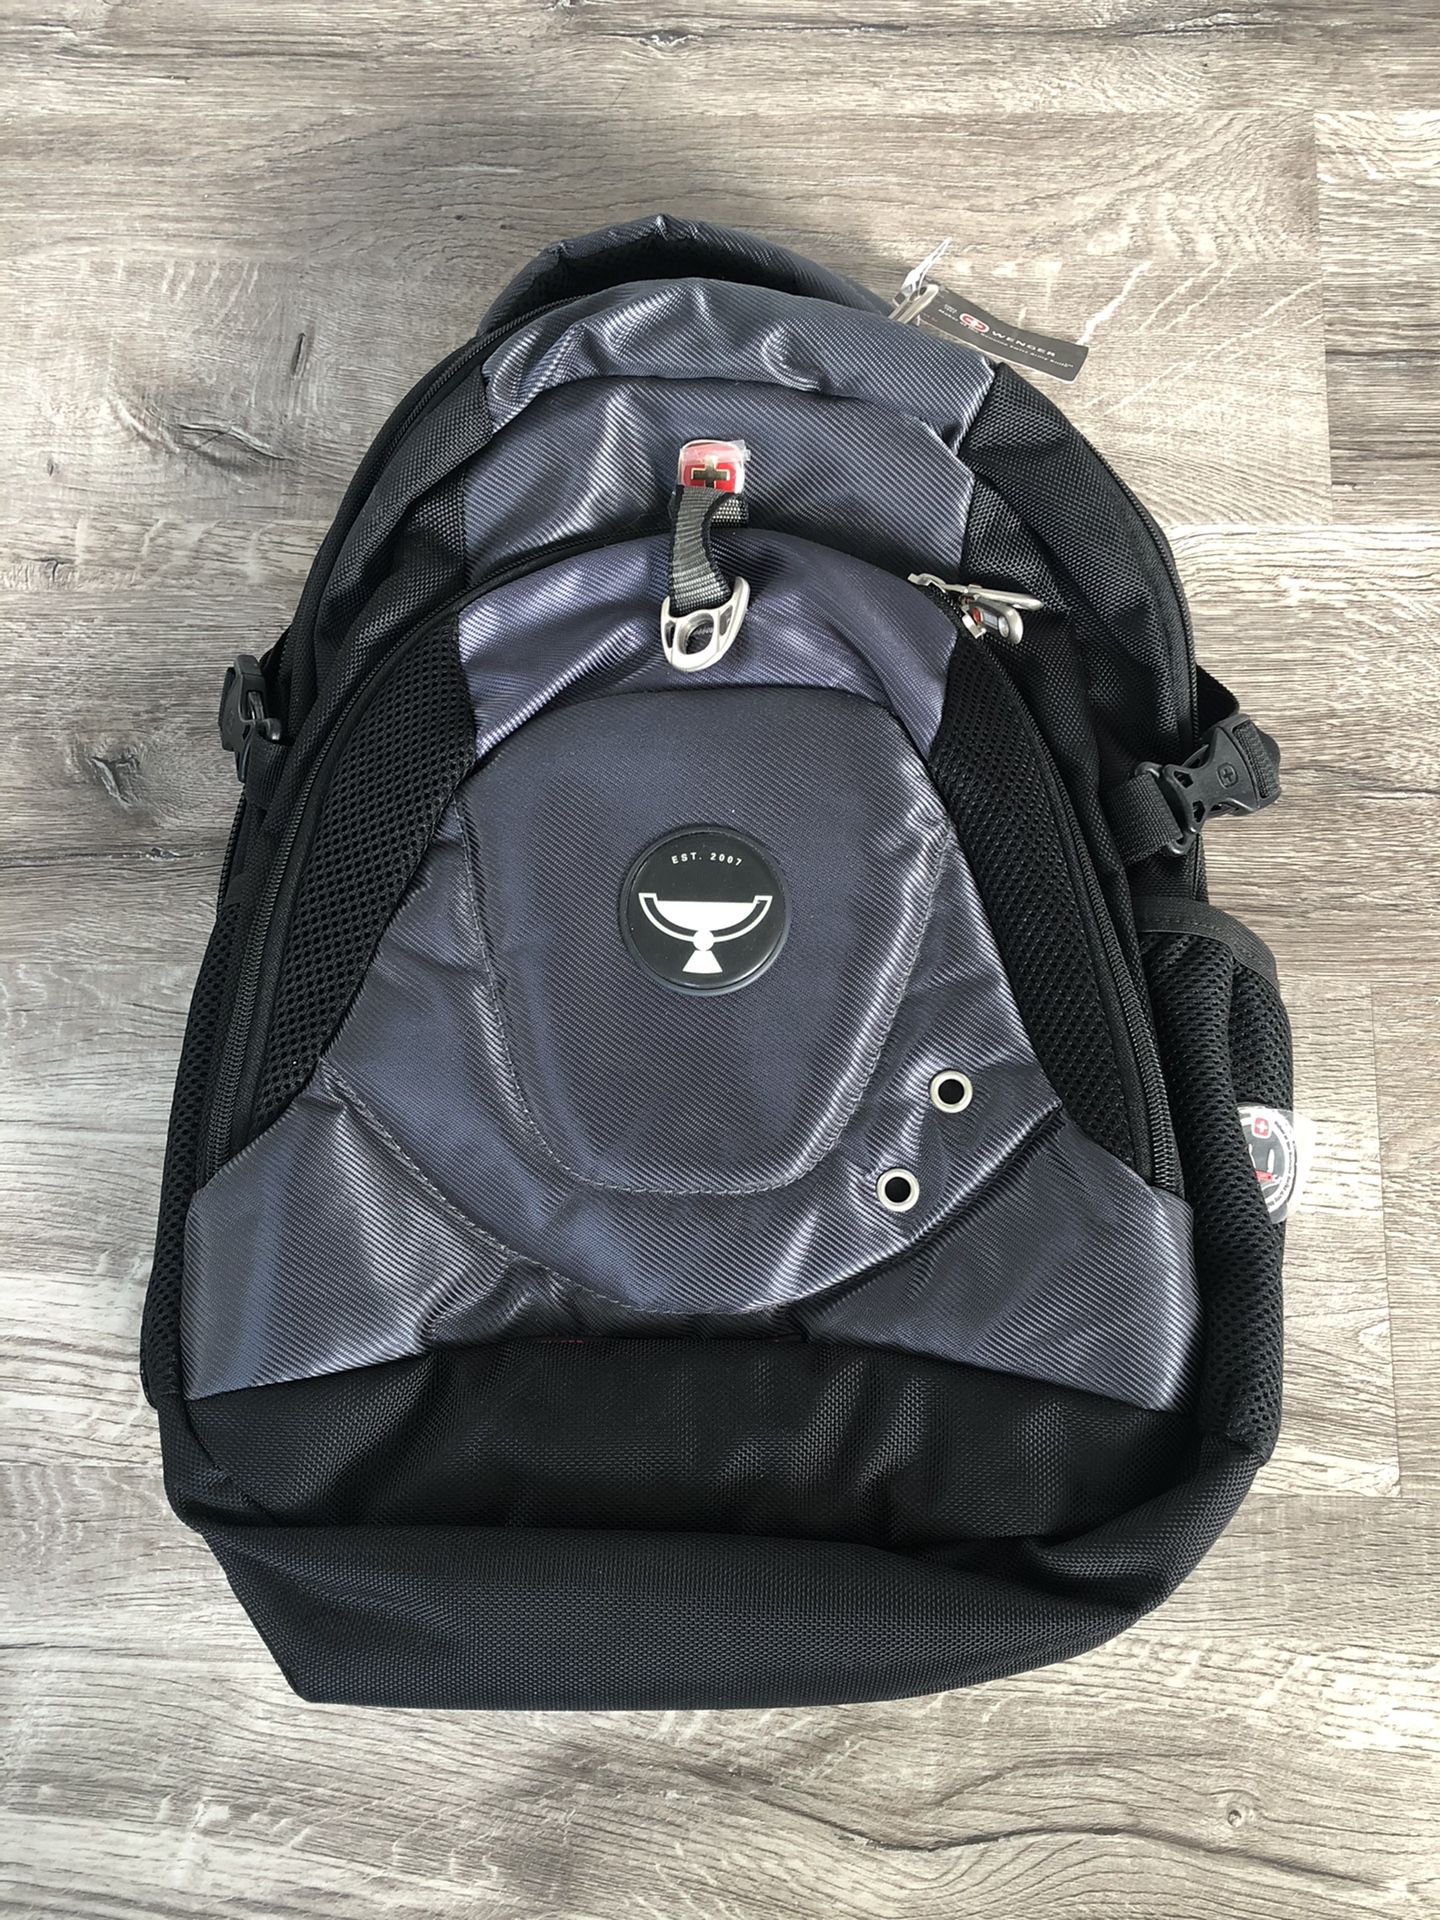 Brand New Backpack. Wenger Swiss Army Multi-use Backpack